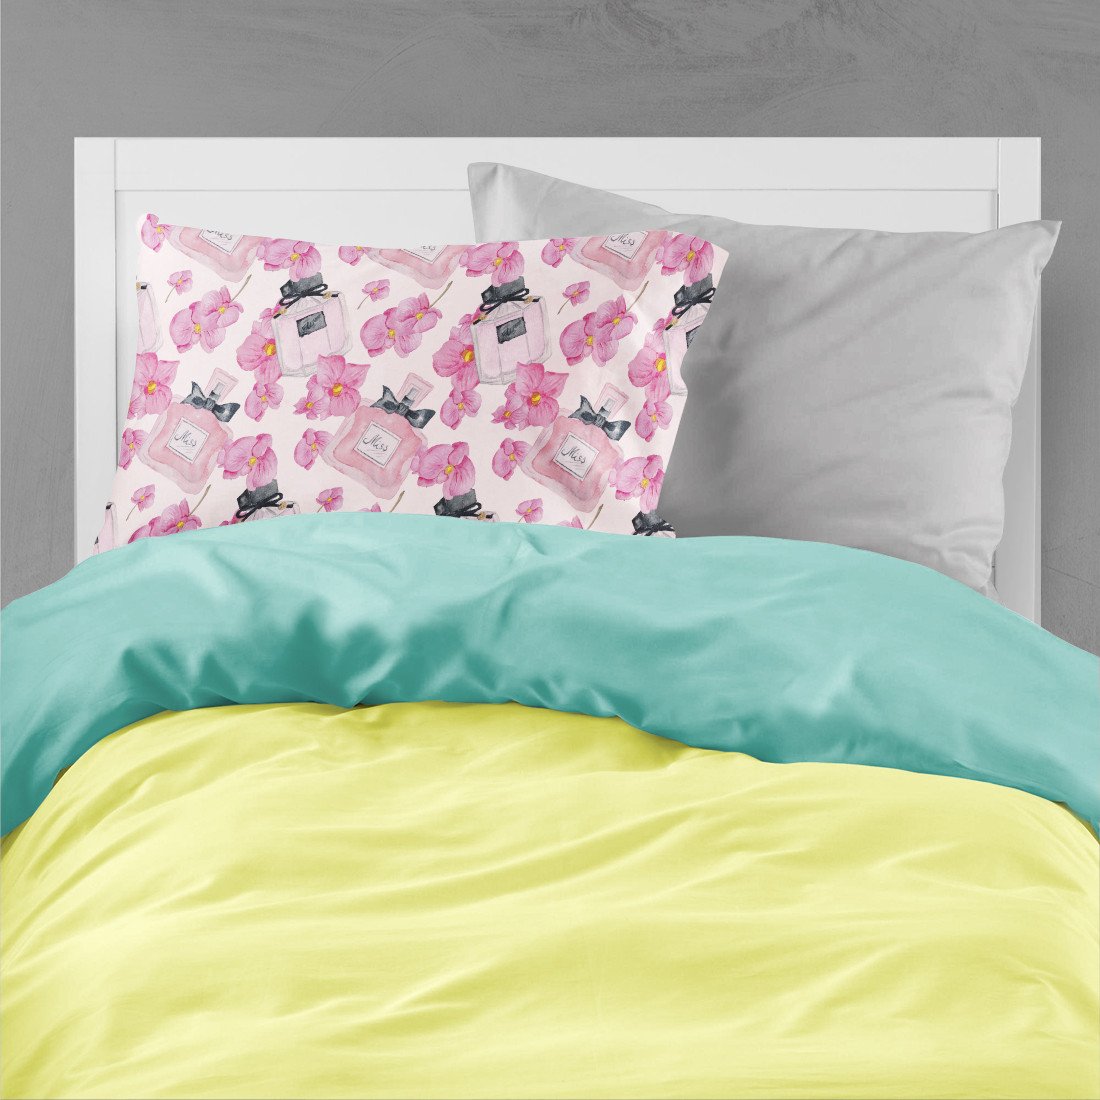 Watercolor Pink Flowers and Perfume Fabric Standard Pillowcase BB7510PILLOWCASE by Caroline's Treasures